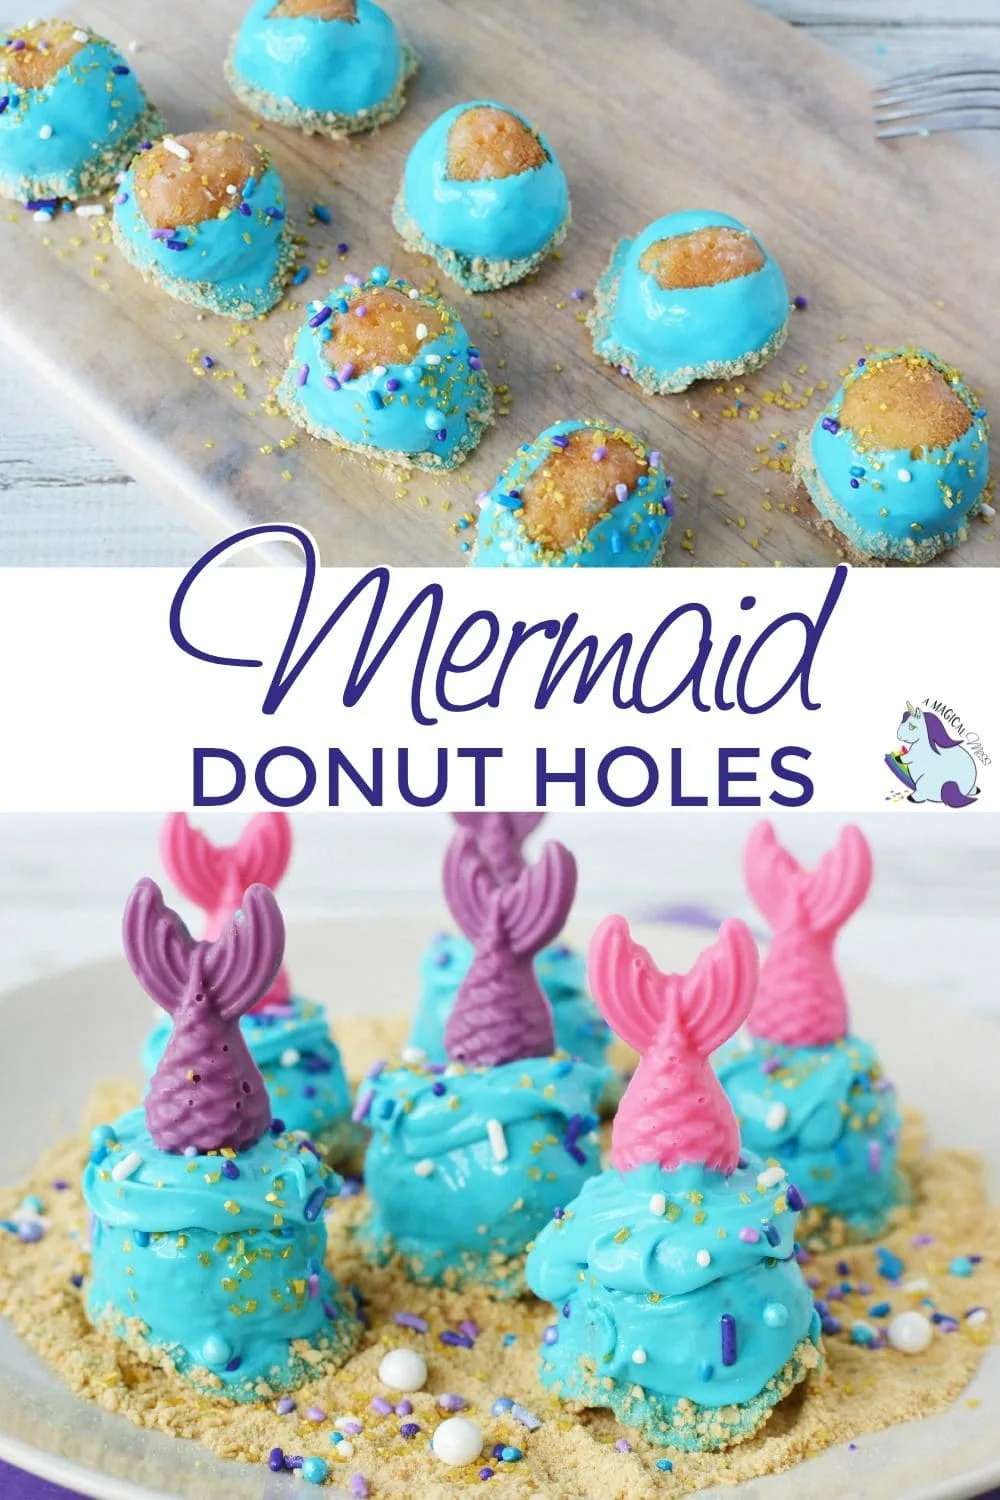 Donuts with mermaid decorations